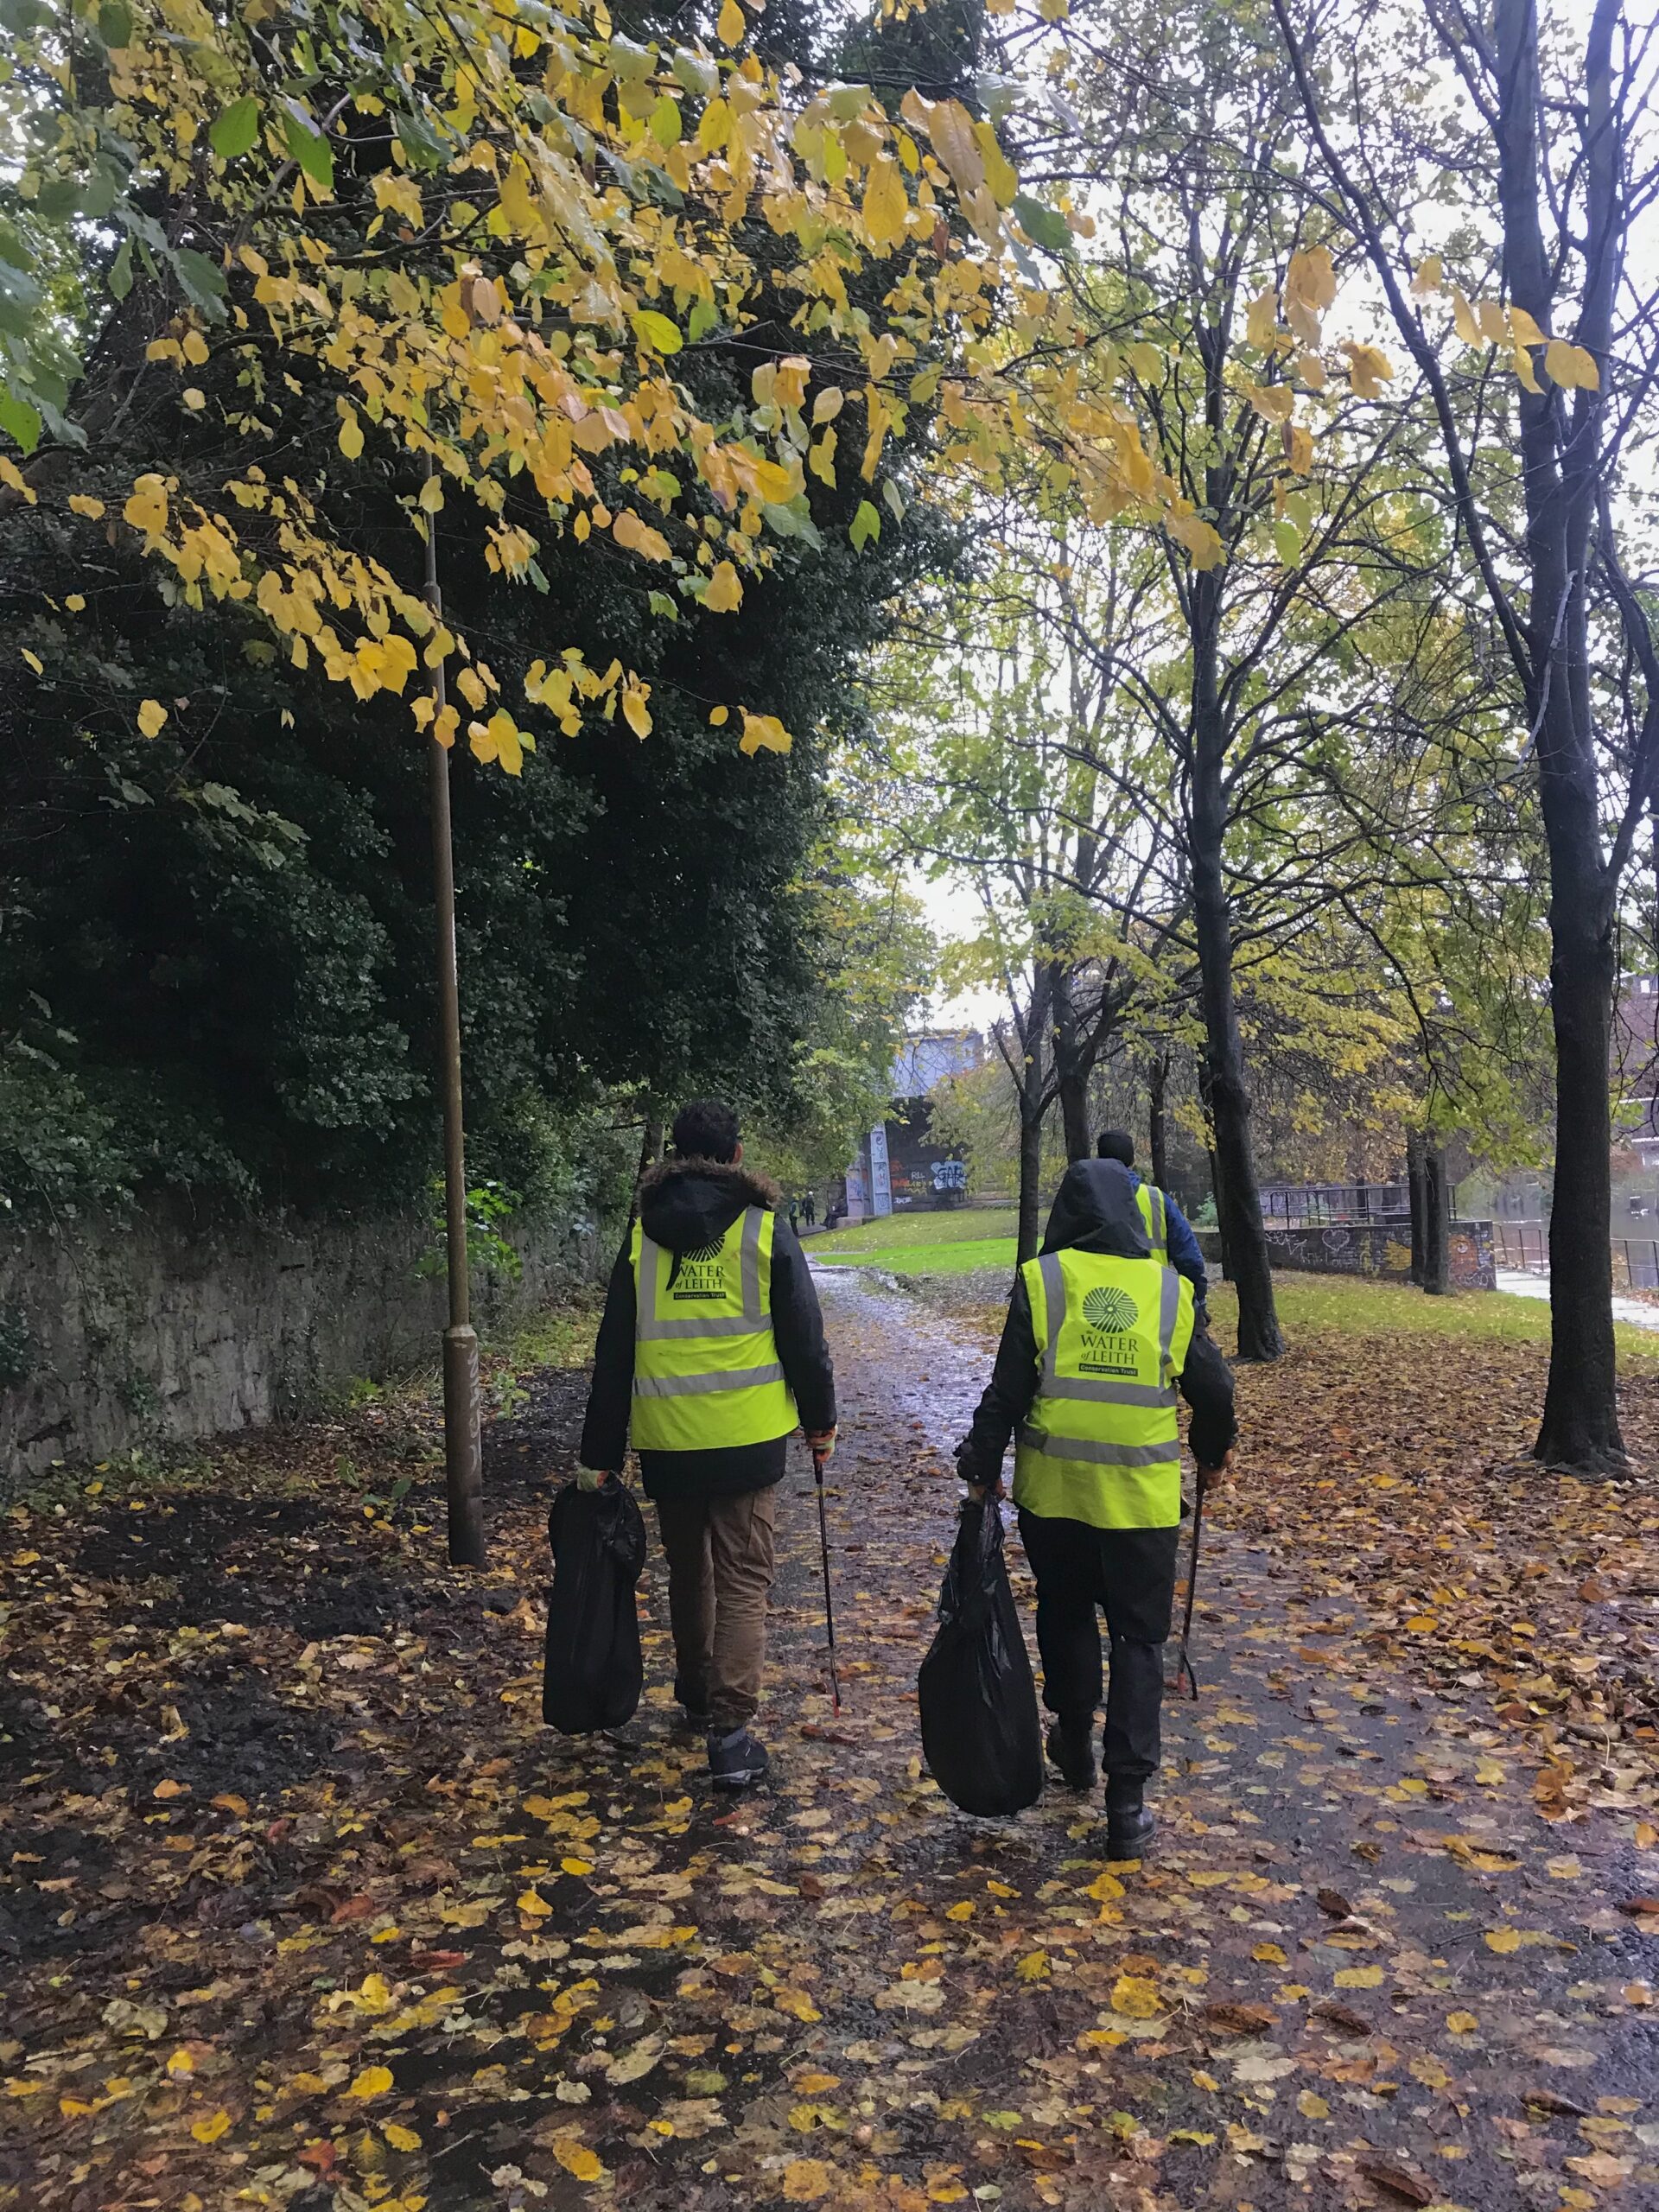 Volunteers helping The Water of Leith Conservation Trust on a litter pick.